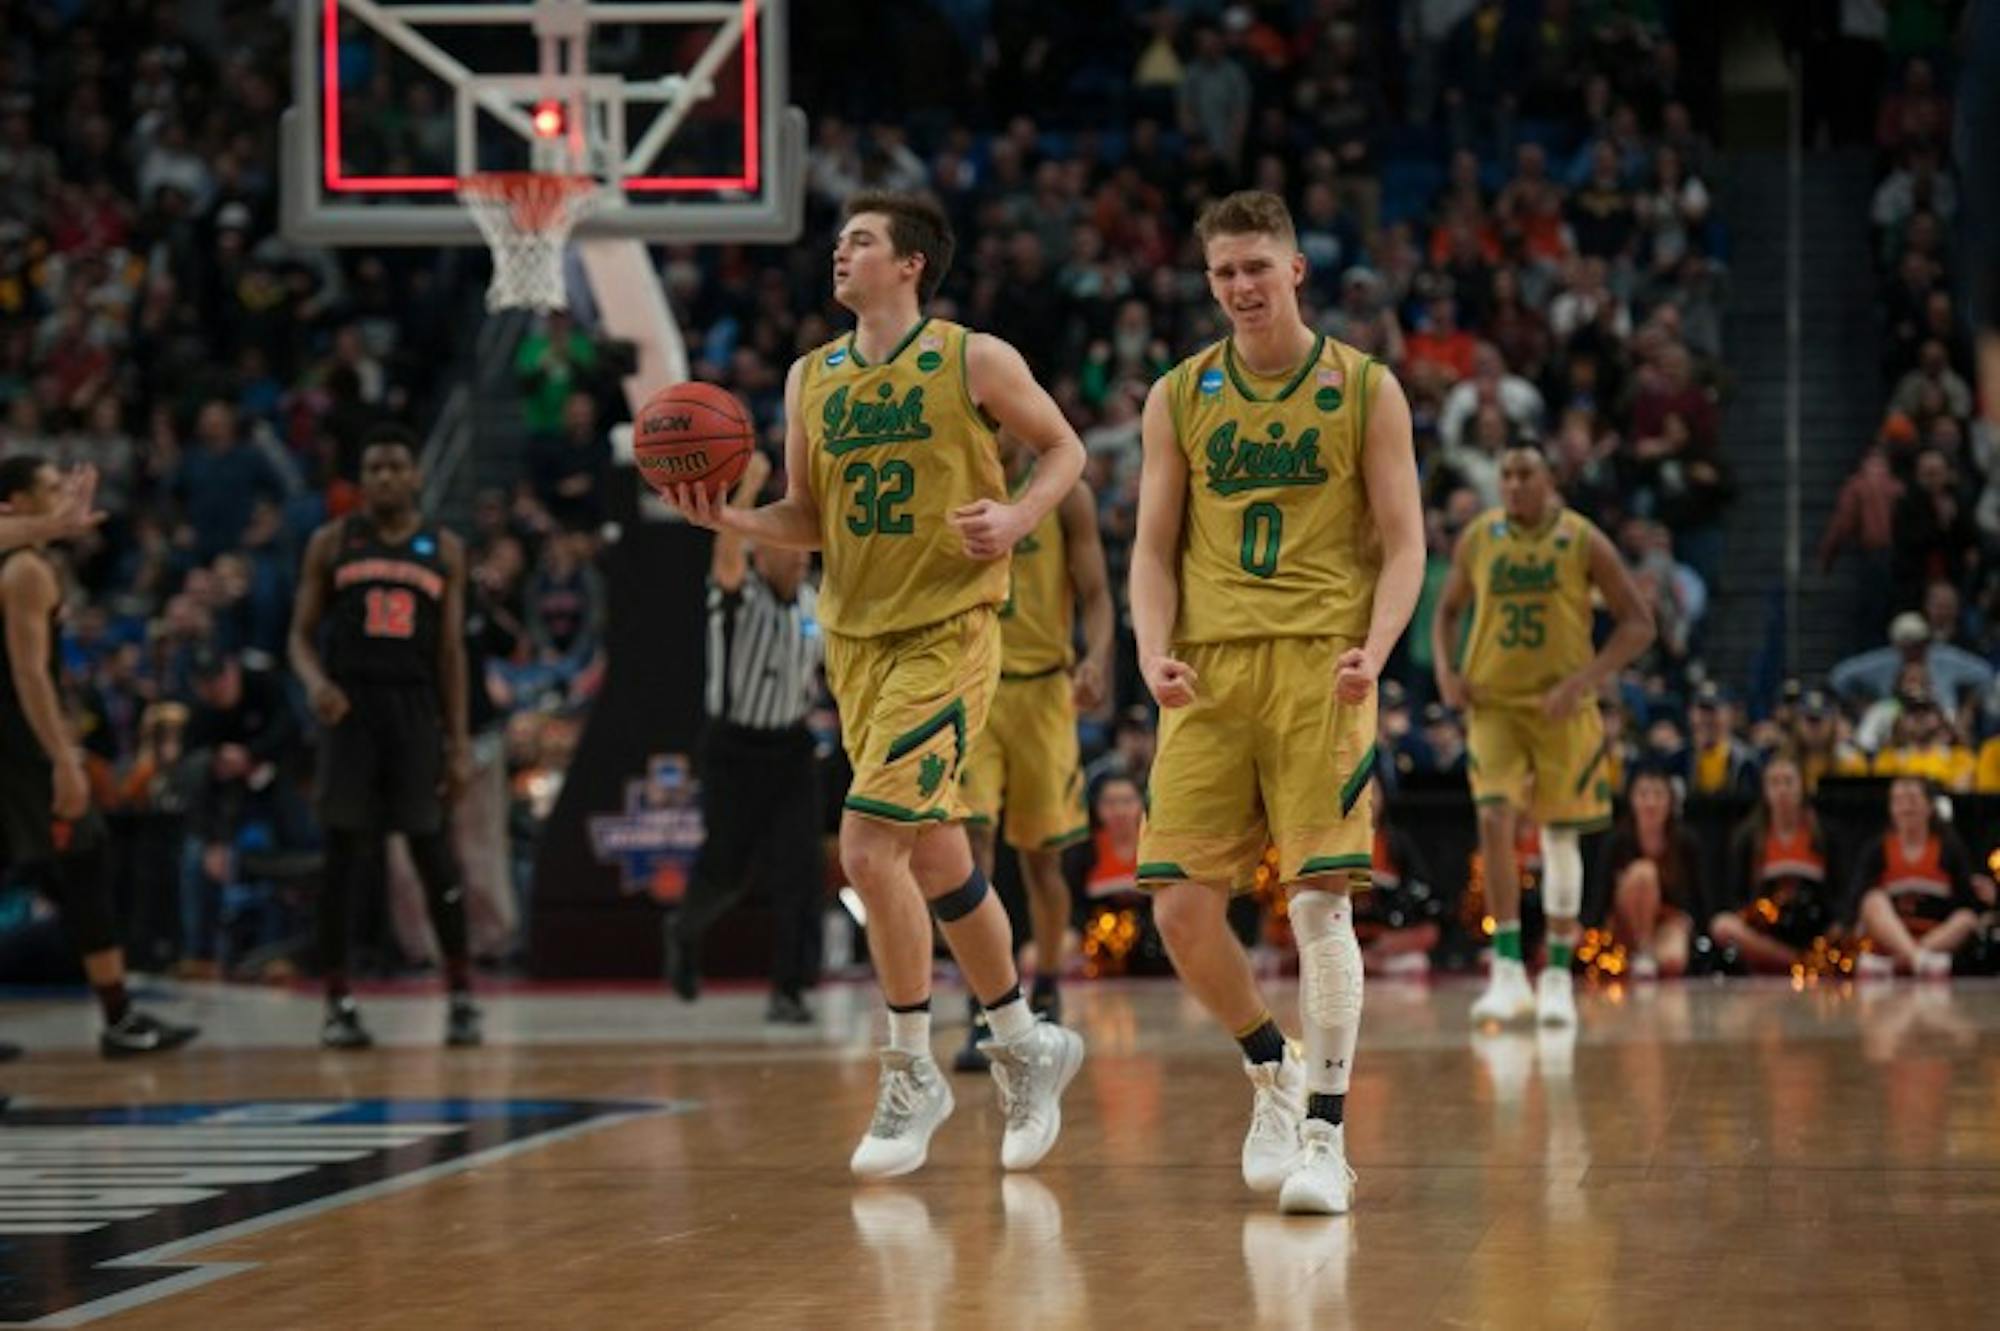 Irish sophomore guard Rex Pflueger celebrates after Notre Dame's 60-58 victory over Princeton on Thursday at KeyBank Arena. Pflueger had four points in the contest, after requiring stitches after taking an elbow to the head.